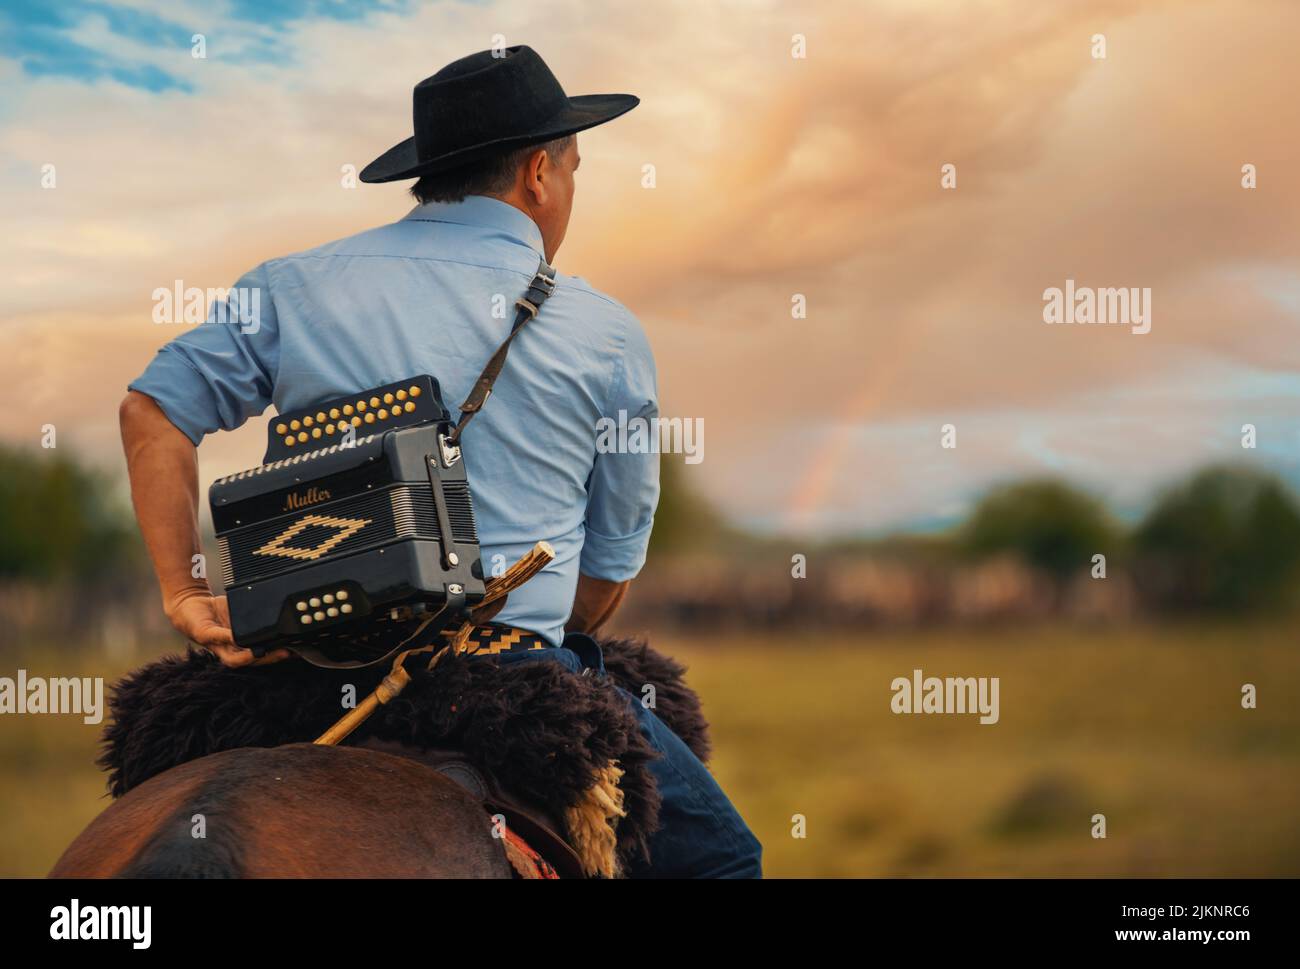 A gaucho riding a horse with an accordion in his back at countryside. Stock Photo